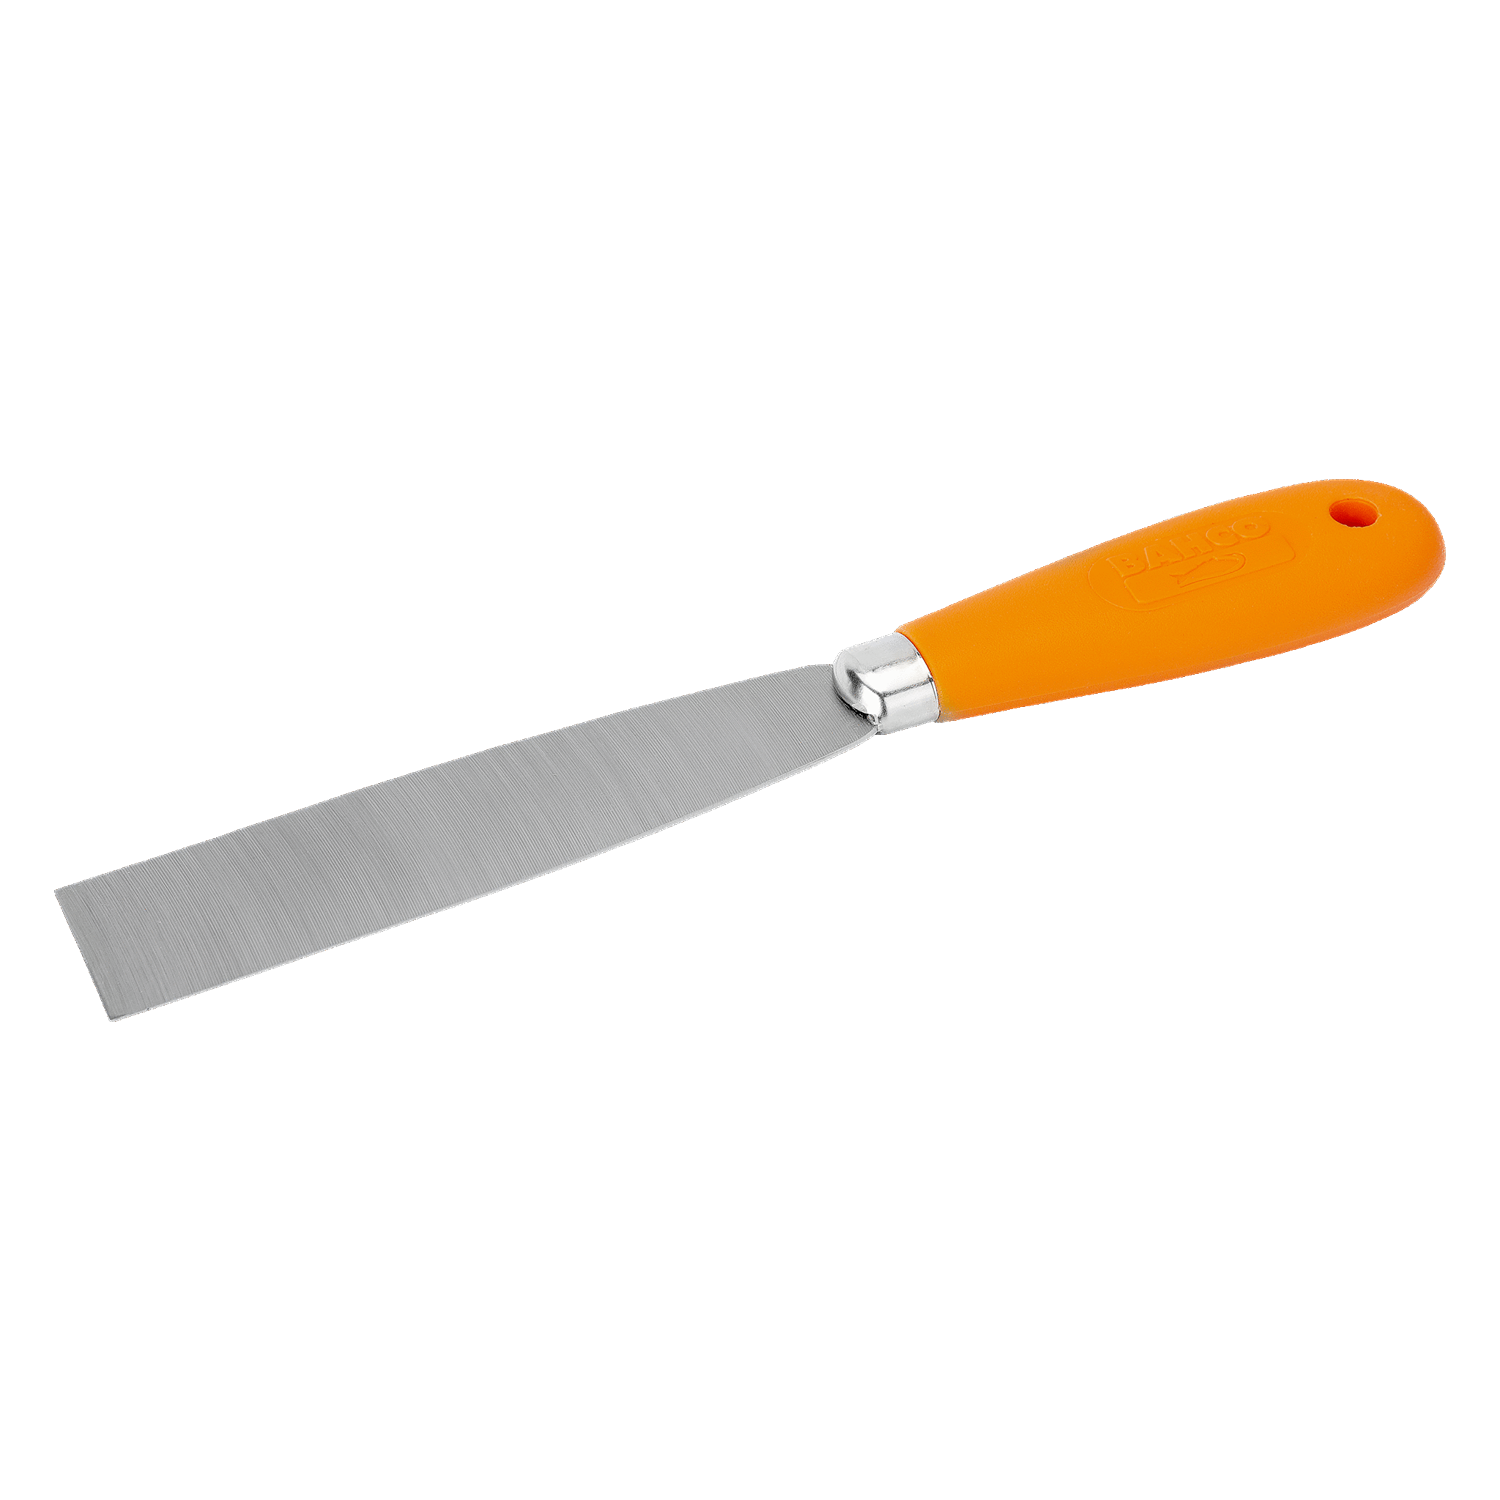 BAHCO 216 Paint Scraper with Carbon Steel Blade (BAHCO Tools) - Premium Paint Scraper from BAHCO - Shop now at Yew Aik.